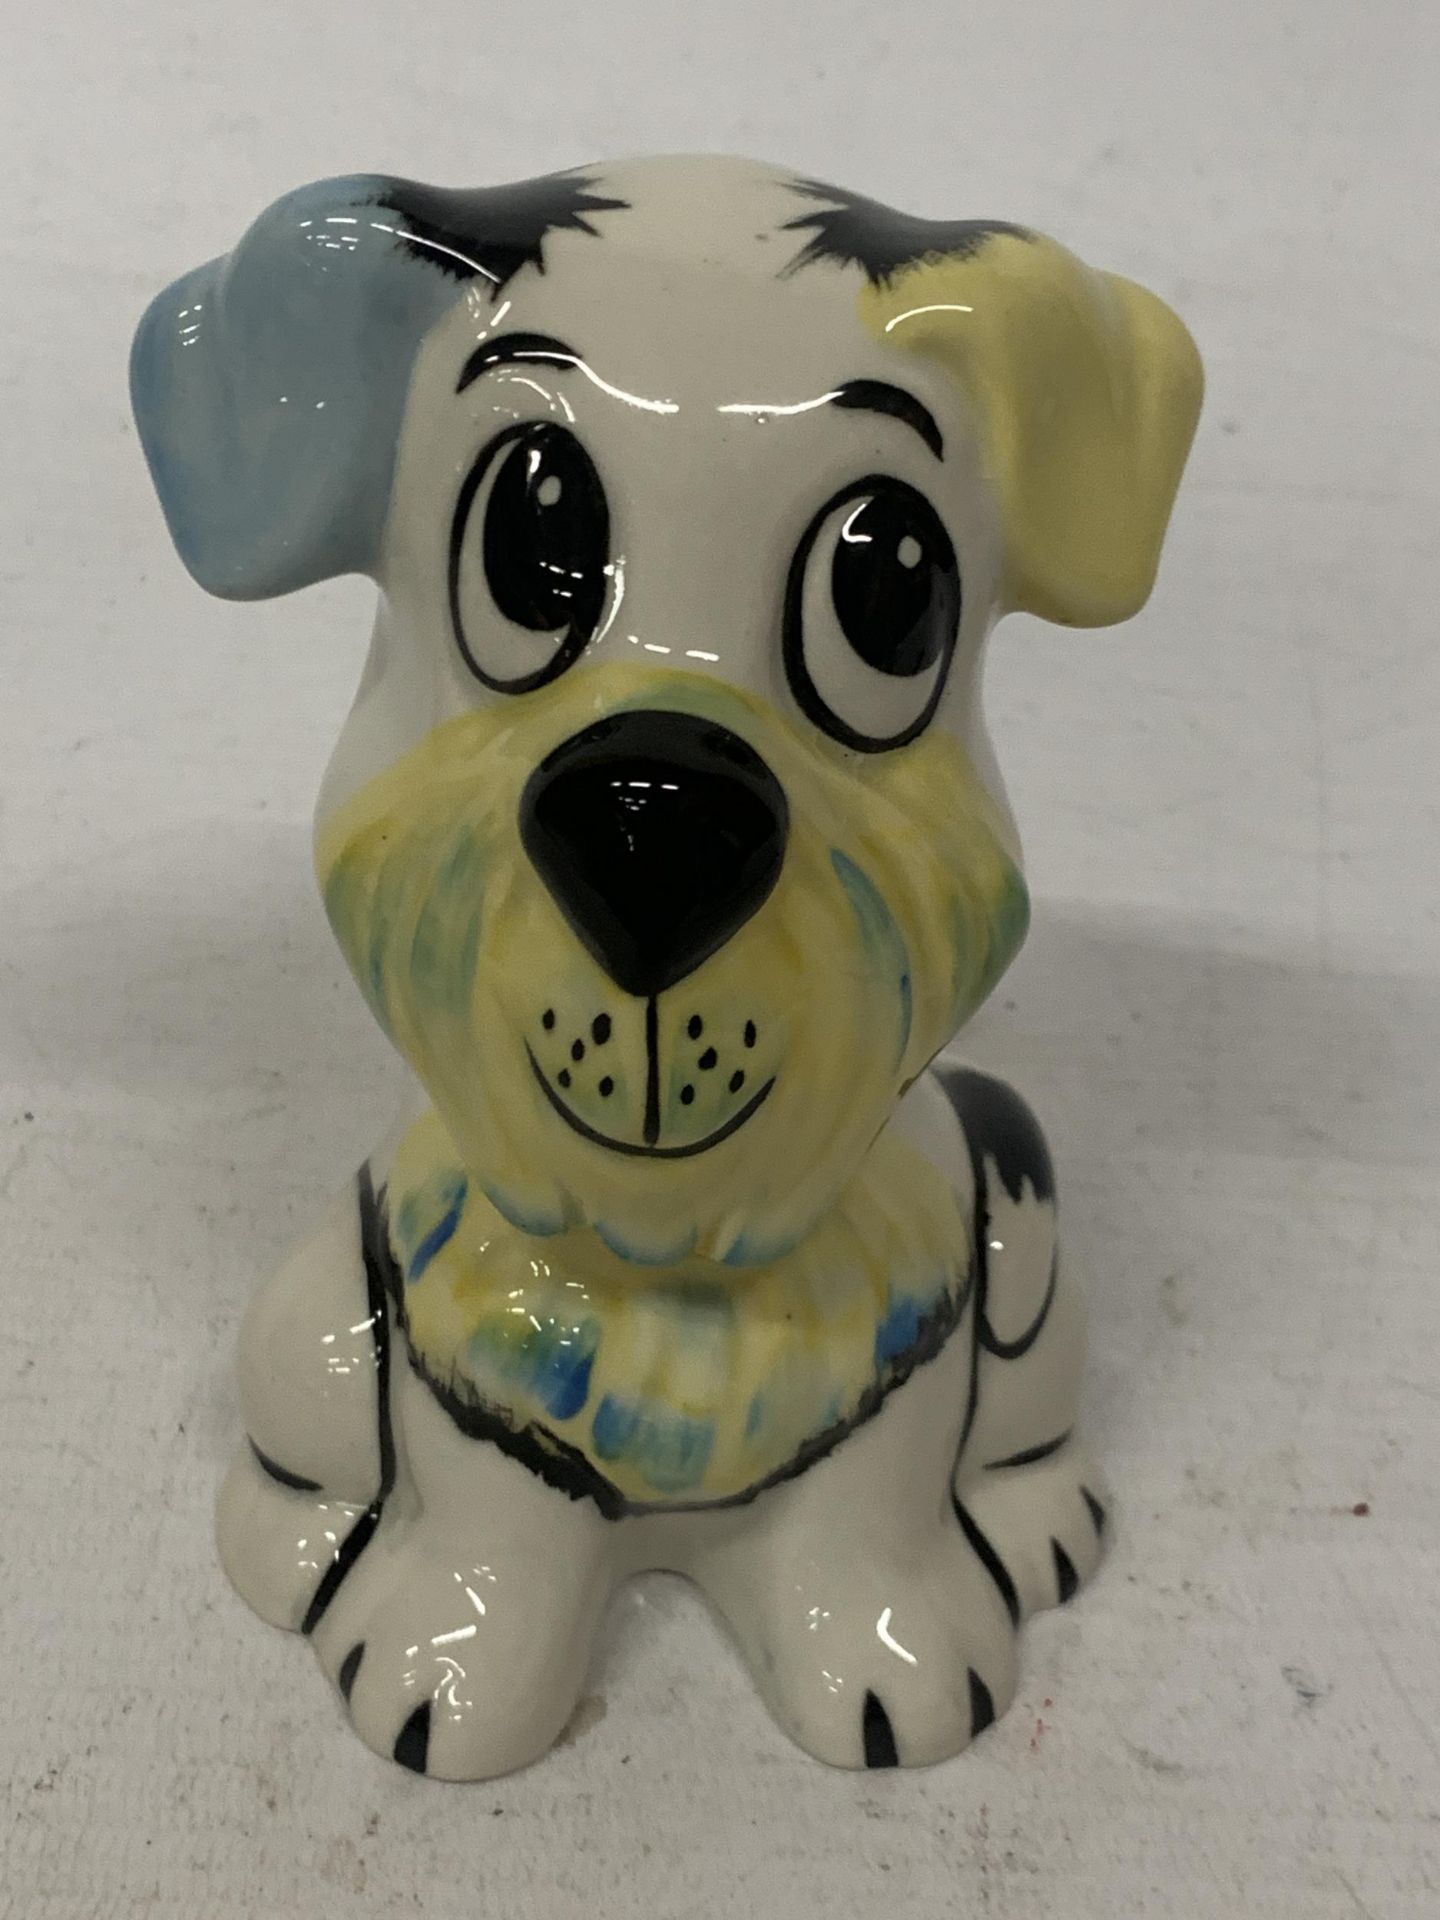 A LORNA BAILEY HAND PAINTED AND SIGNED WUF WUF DOG FIGURE